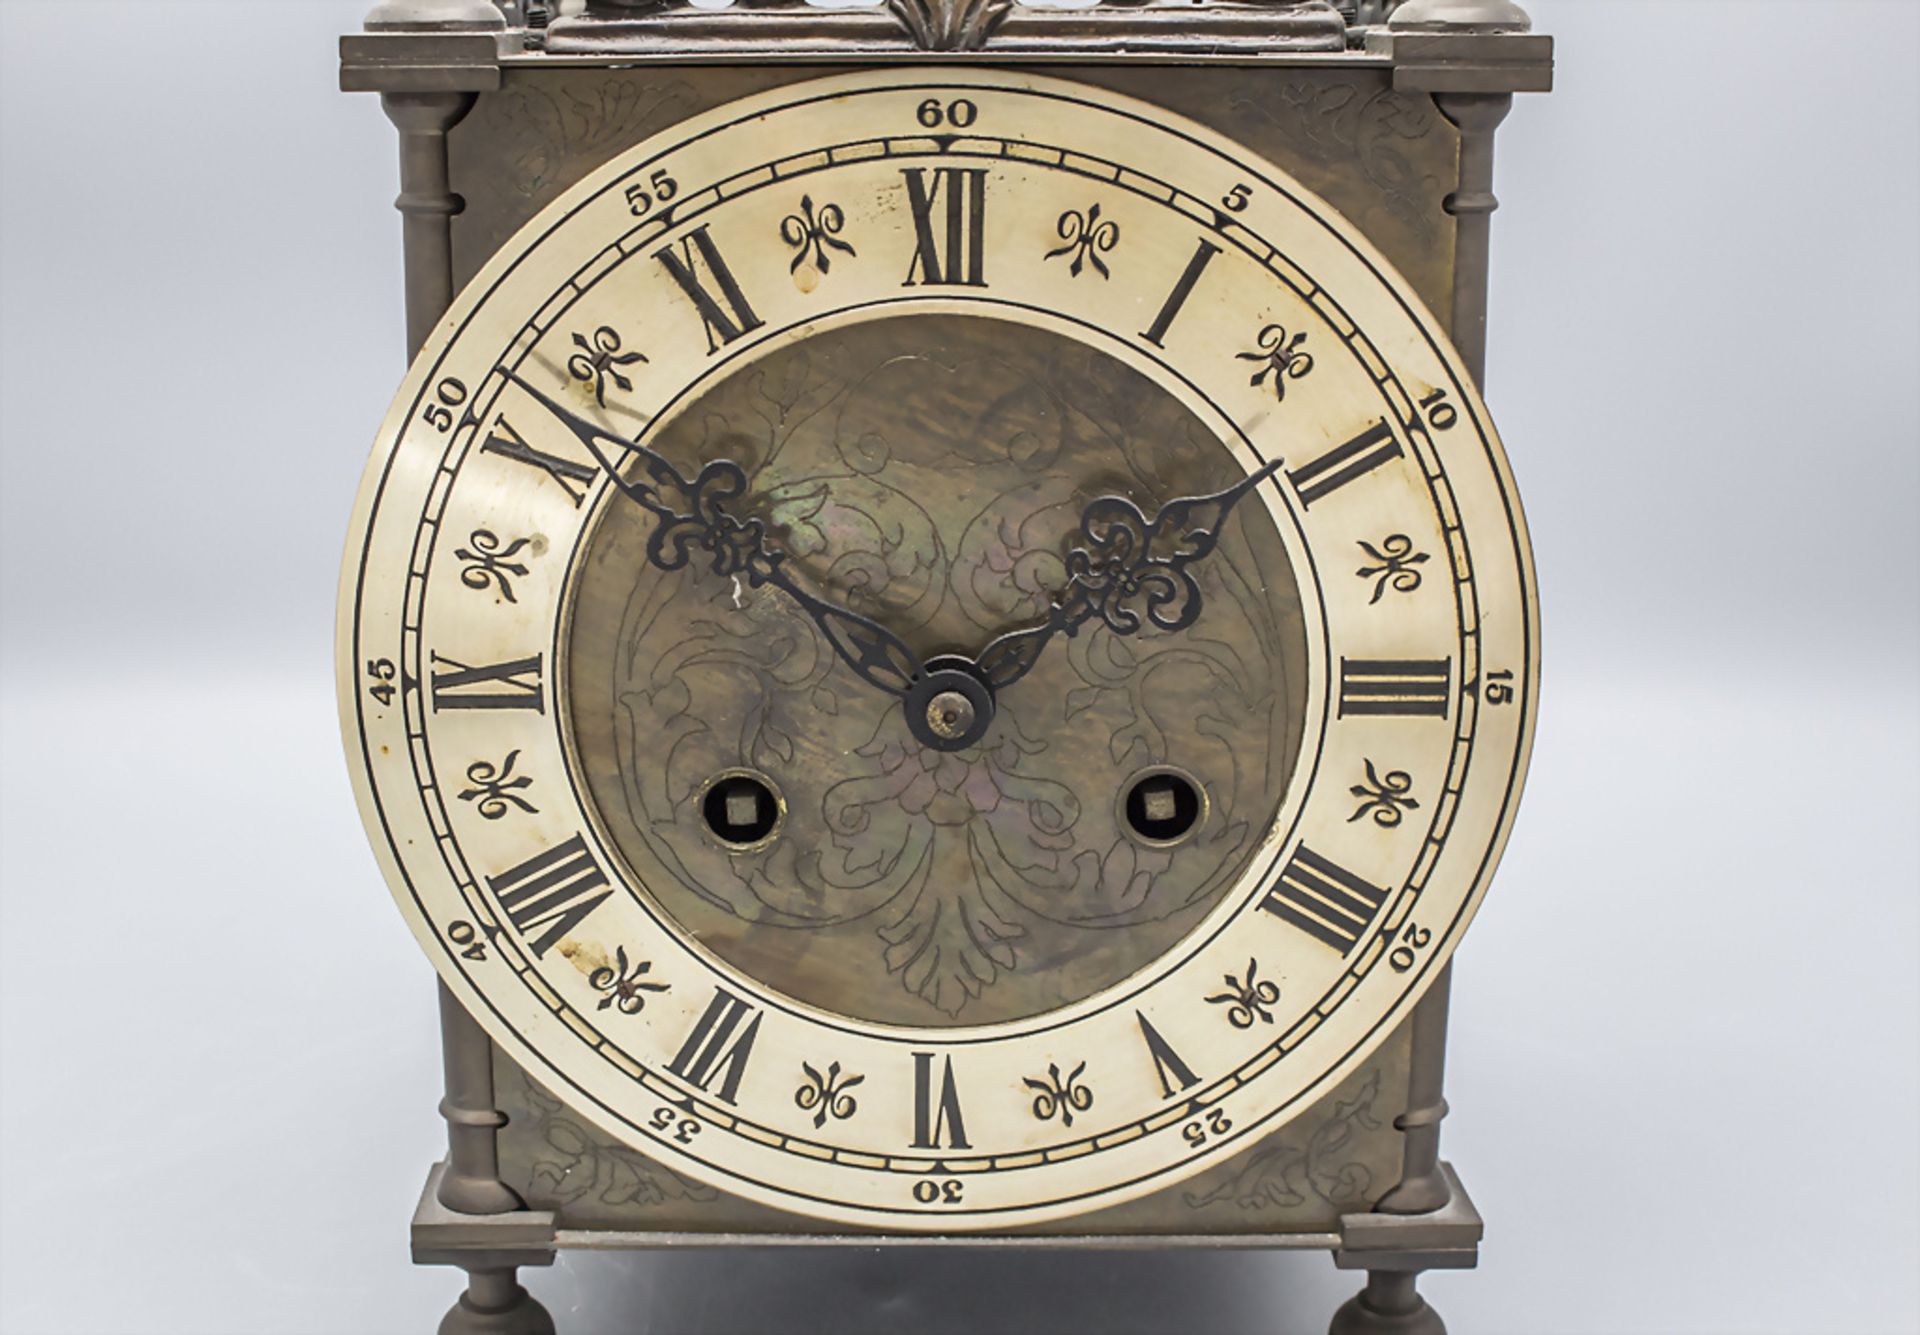 Laternenuhr / A latern clock, 20. Jh. - Image 2 of 7